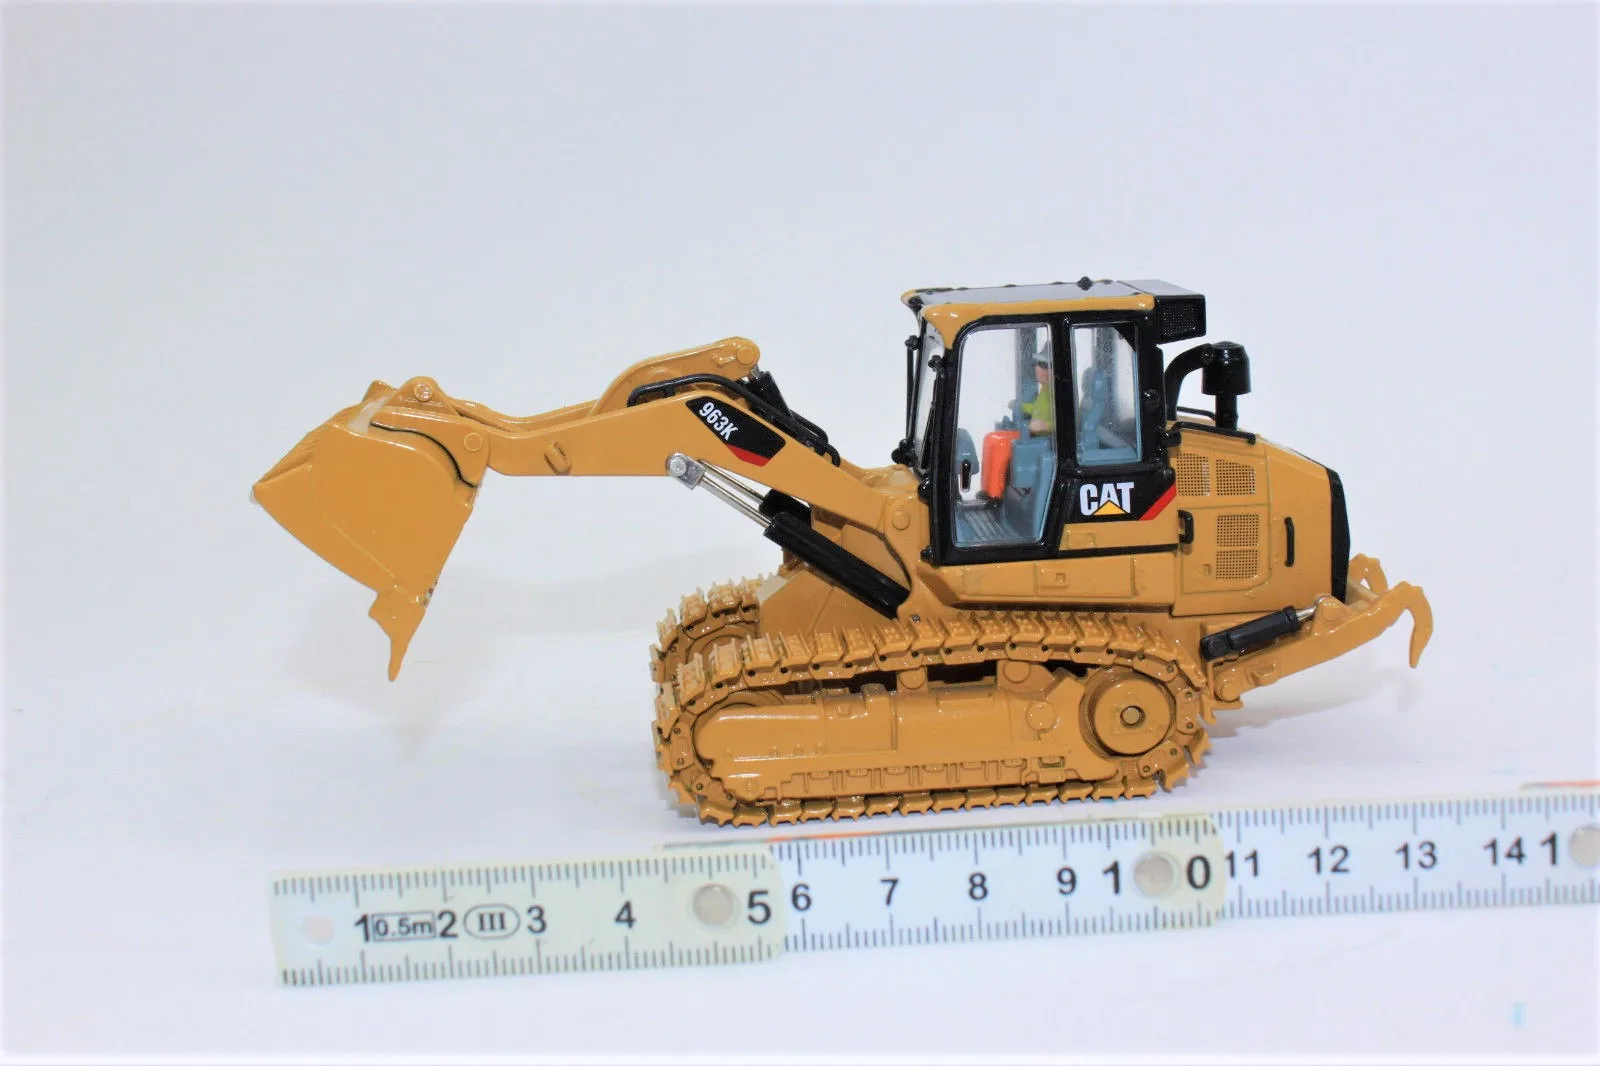 

CAT CATERPILLAR 963K TRACK LOADER WITH OPERATOR 1/50 BY DIECAST MASTERS DM85572